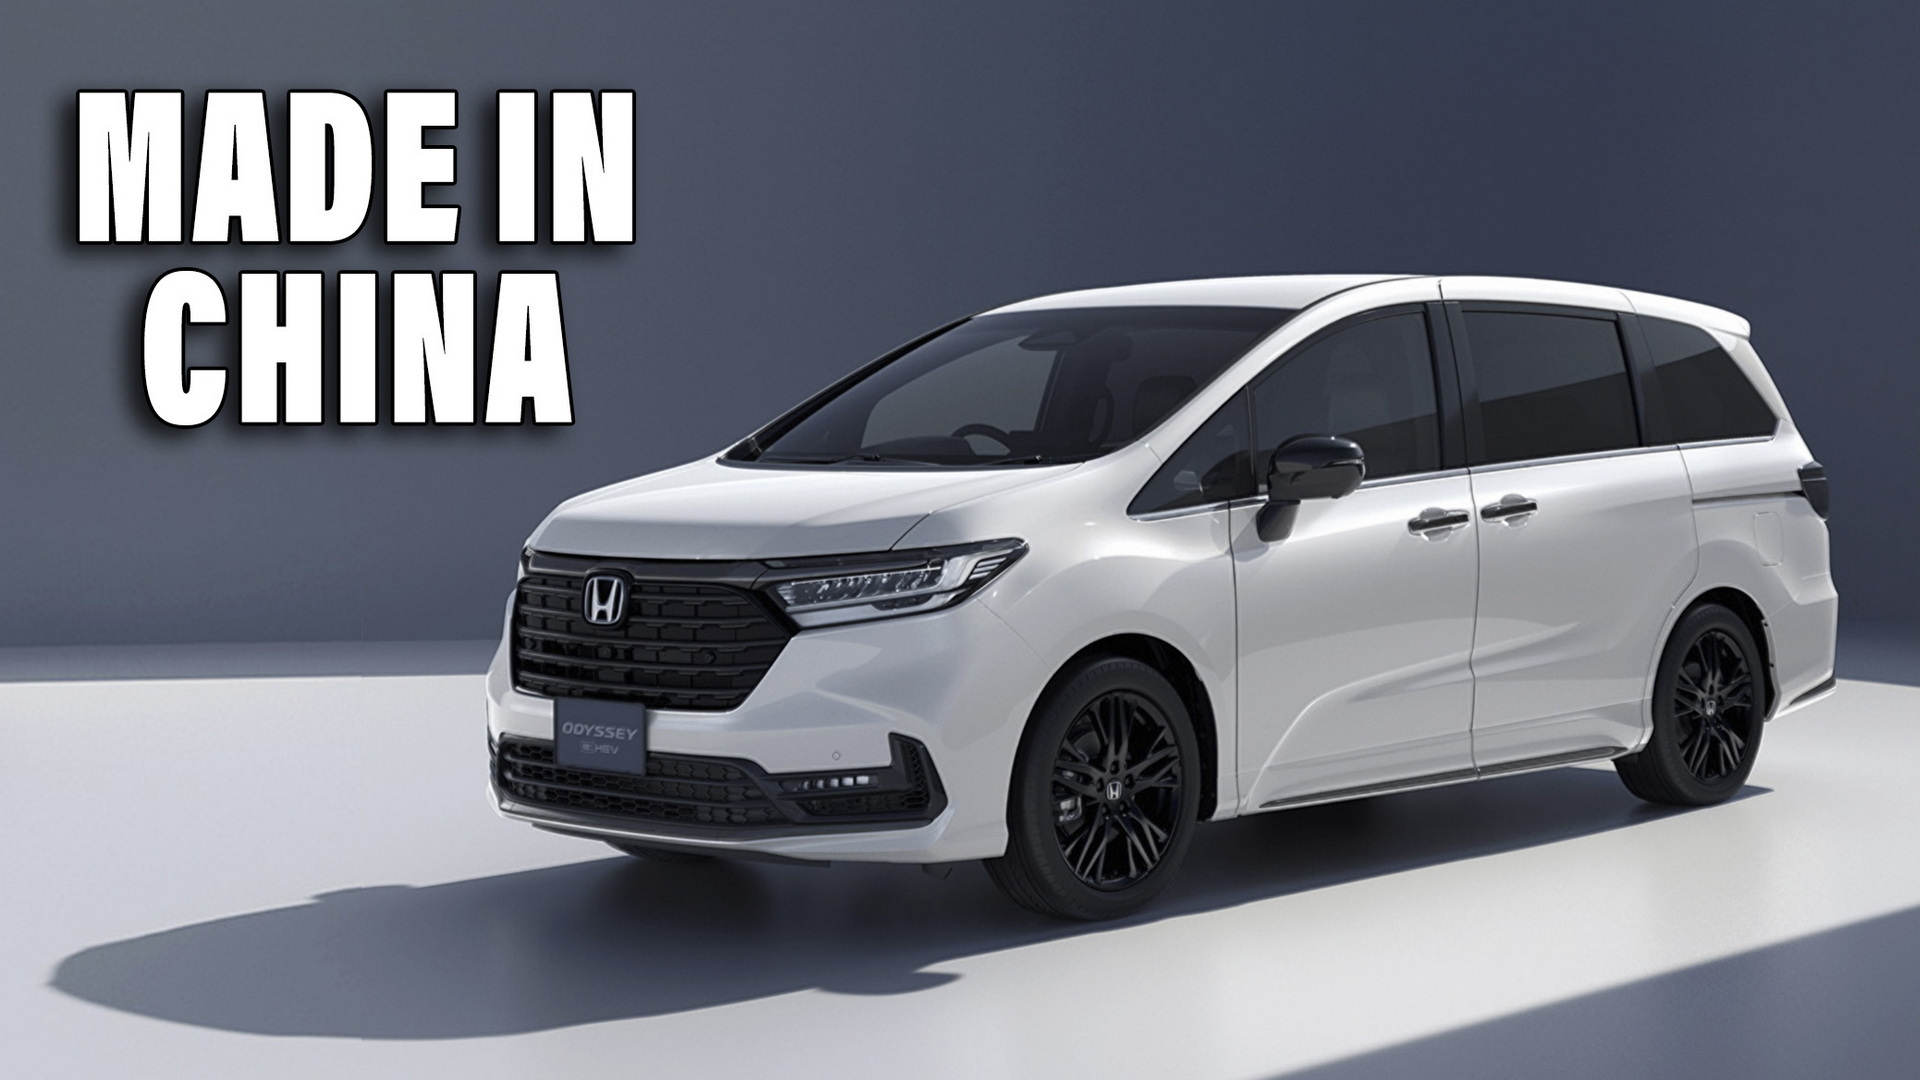 Honda Odyssey Relaunched In Japan, Now Imported From China | Carscoops